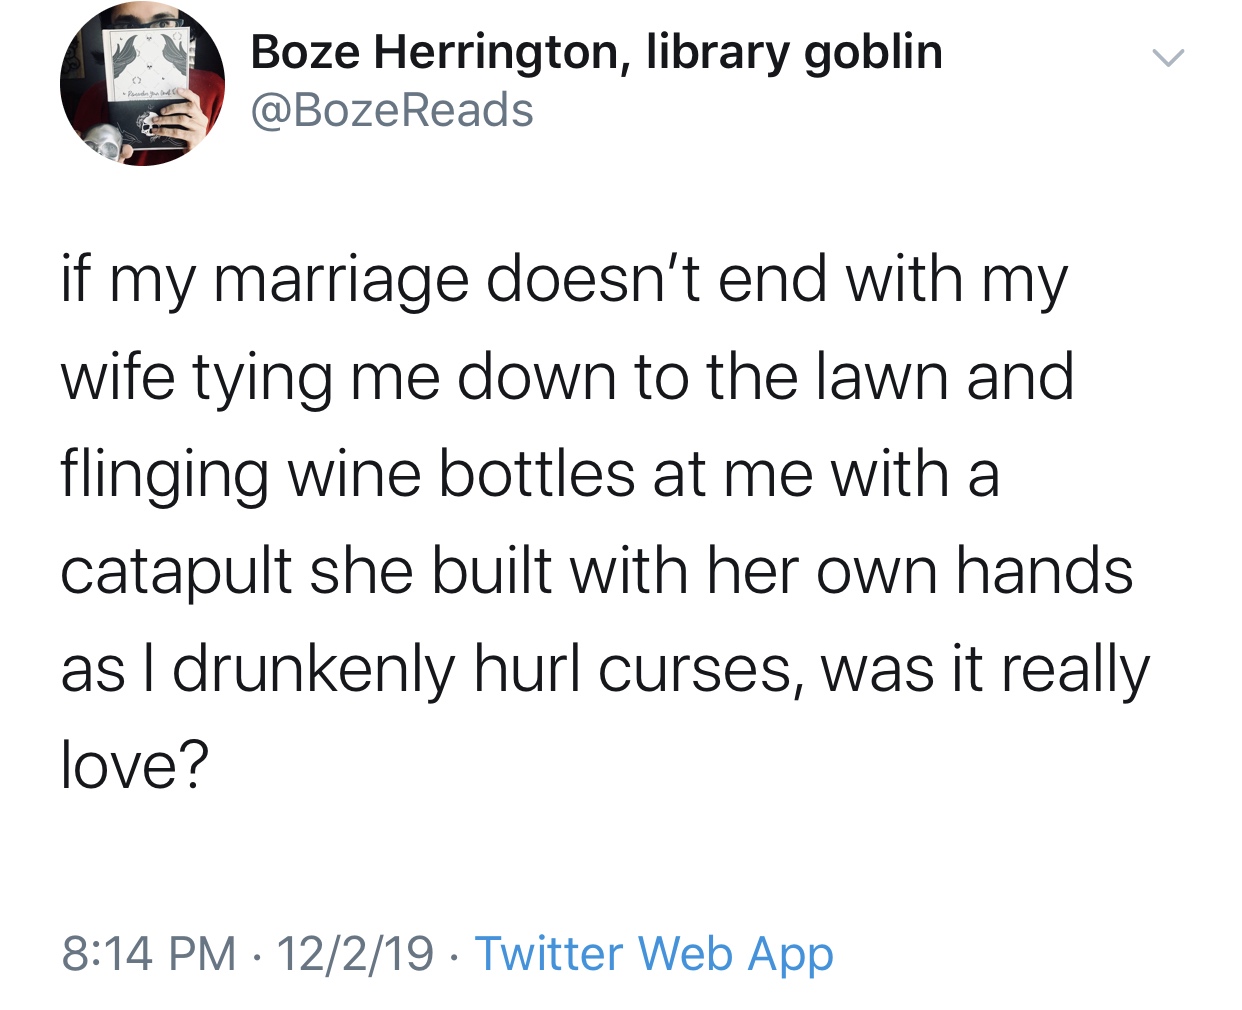 paul joseph watson on ben shapiro - Boze Herrington, library goblin if my marriage doesn't end with my wife tying me down to the lawn and flinging wine bottles at me with a catapult she built with her own hands as I drunkenly hurl curses, was it really lo